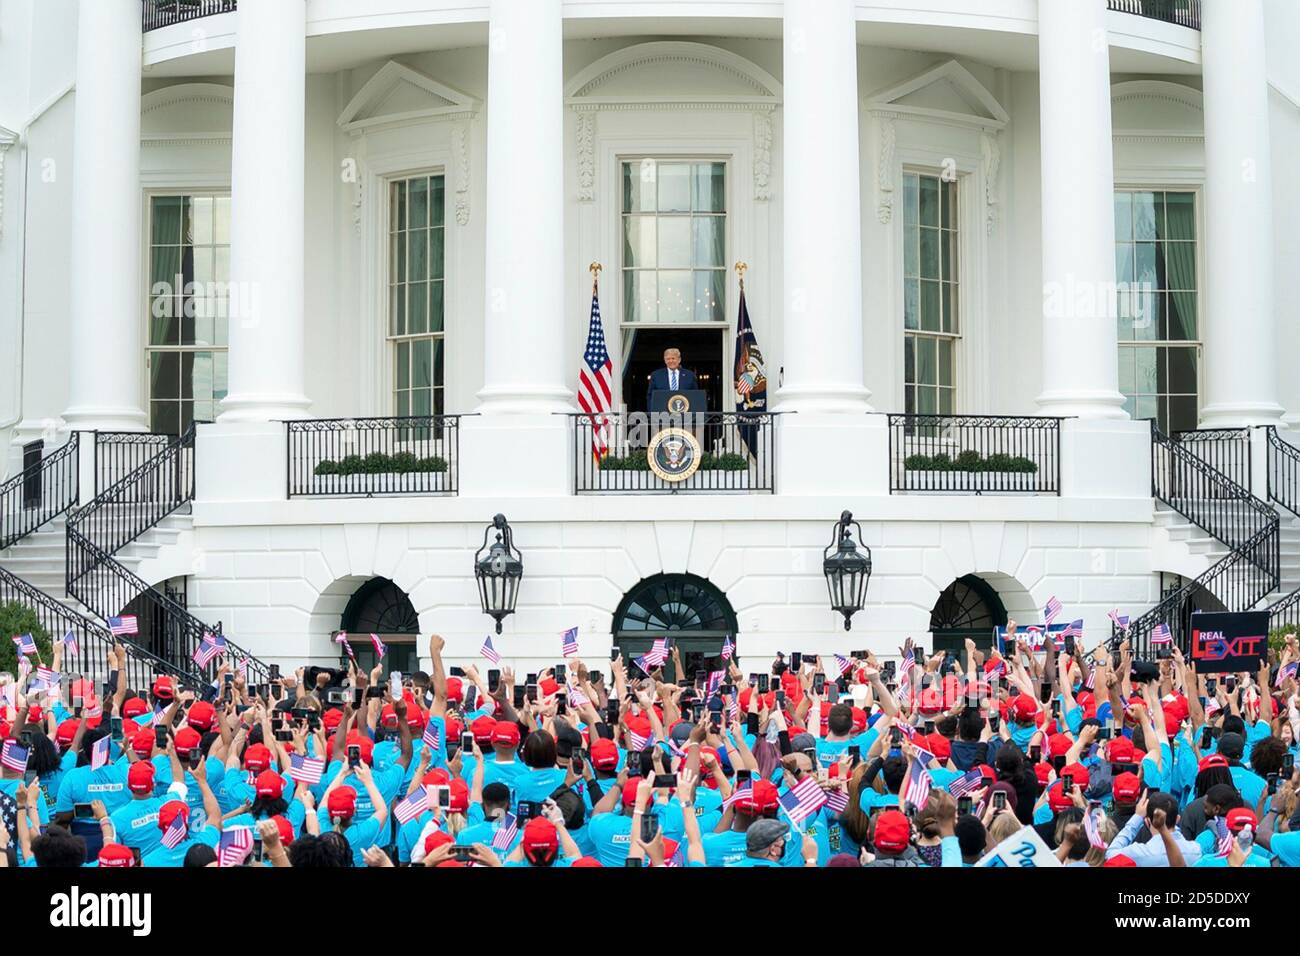 Supporter of U.S President Donald Trump, wearing red MAGA hats, cheer during a law and order themed campaign rally on the South Lawn of the White House October 10, 2020 in Washington, DC. Stock Photo